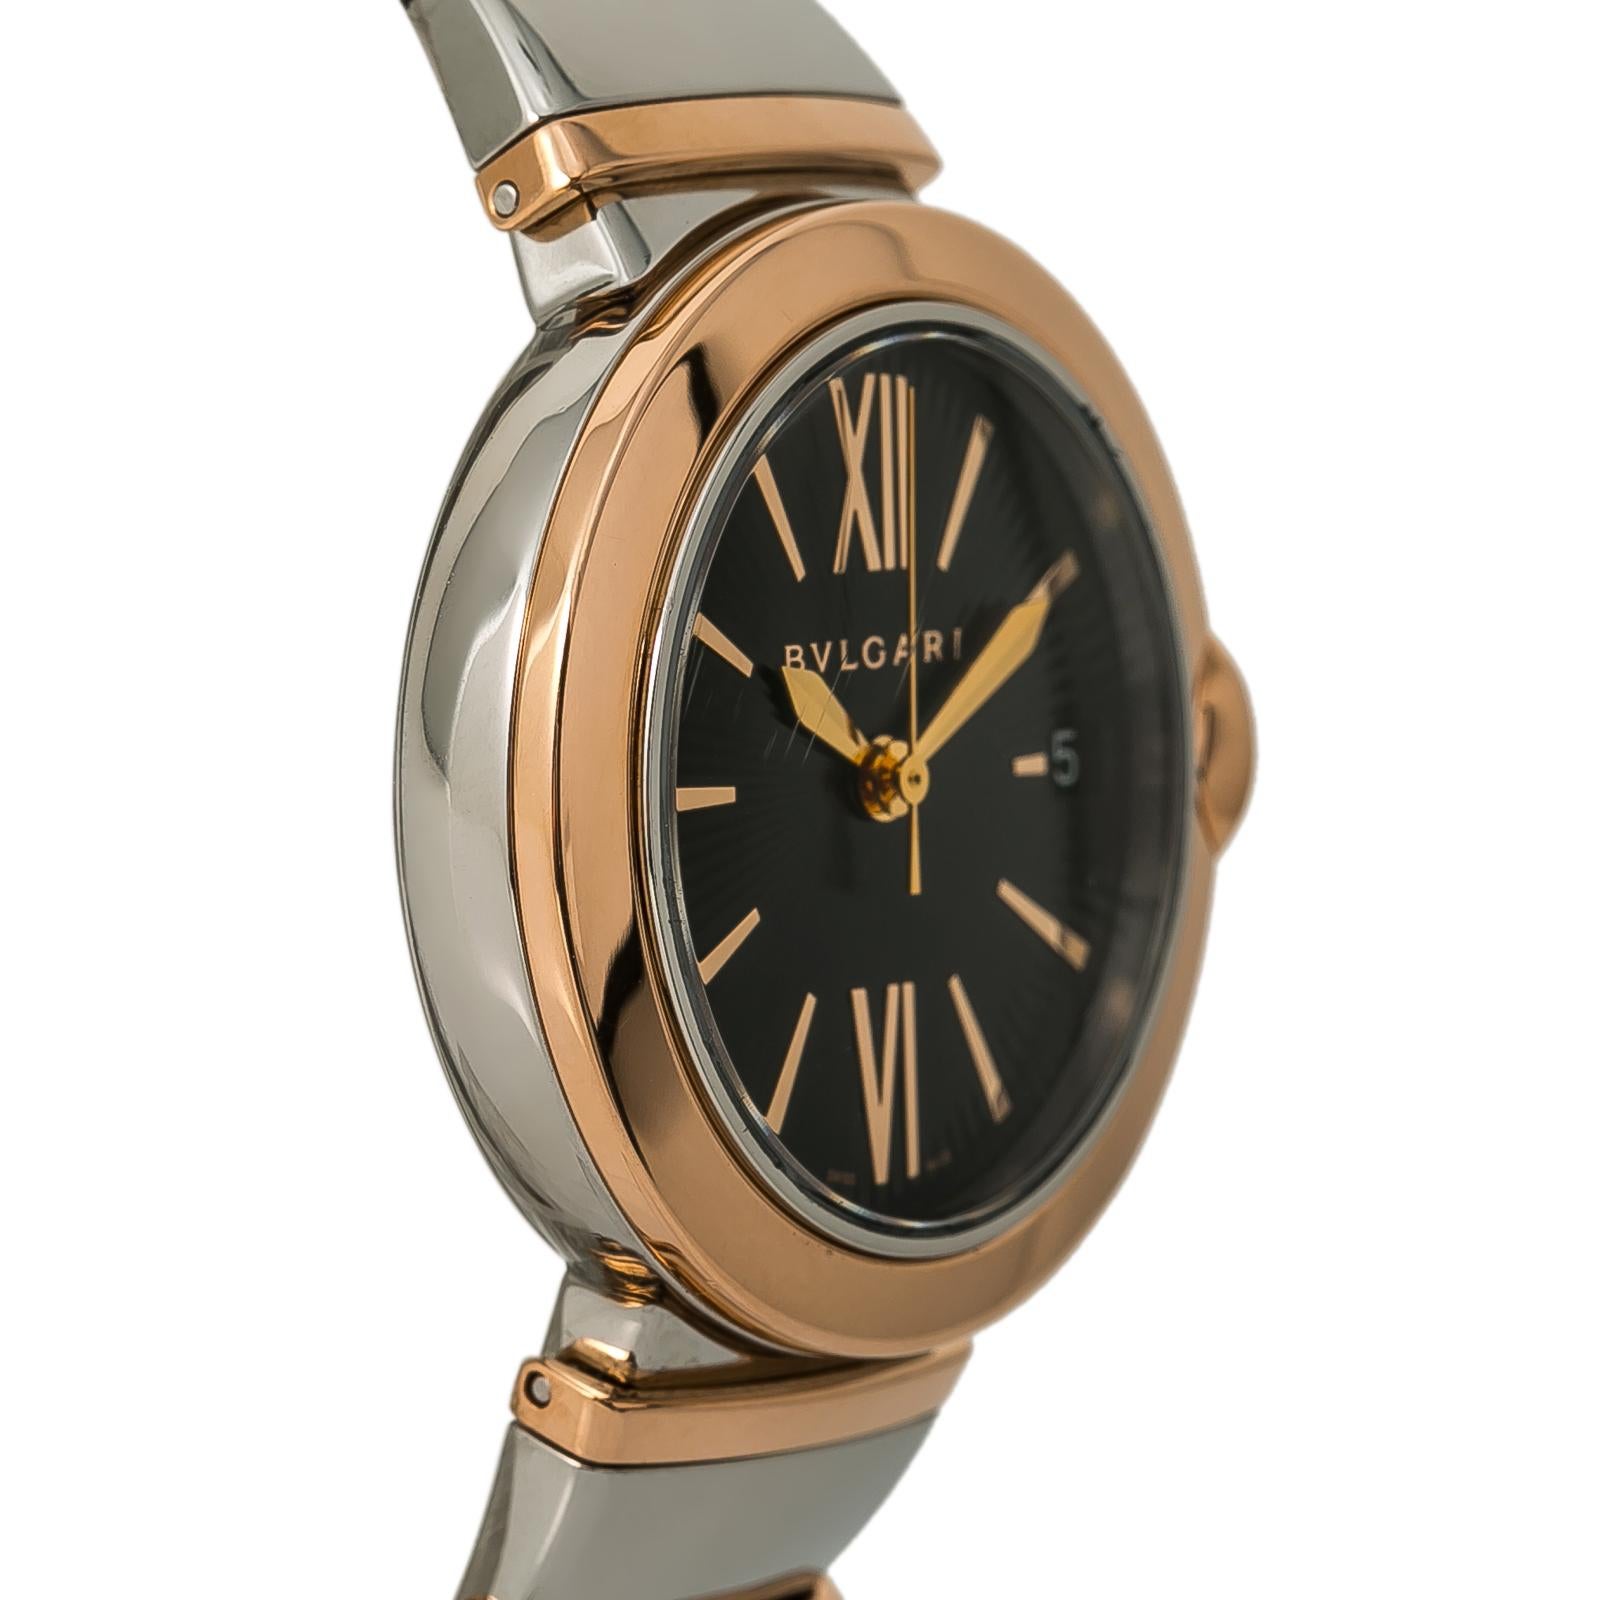 Contemporary Bvlgari Lvcea LUP 33 SG Ladies Automatic Watch 18k Rose Gold Two Tone For Sale